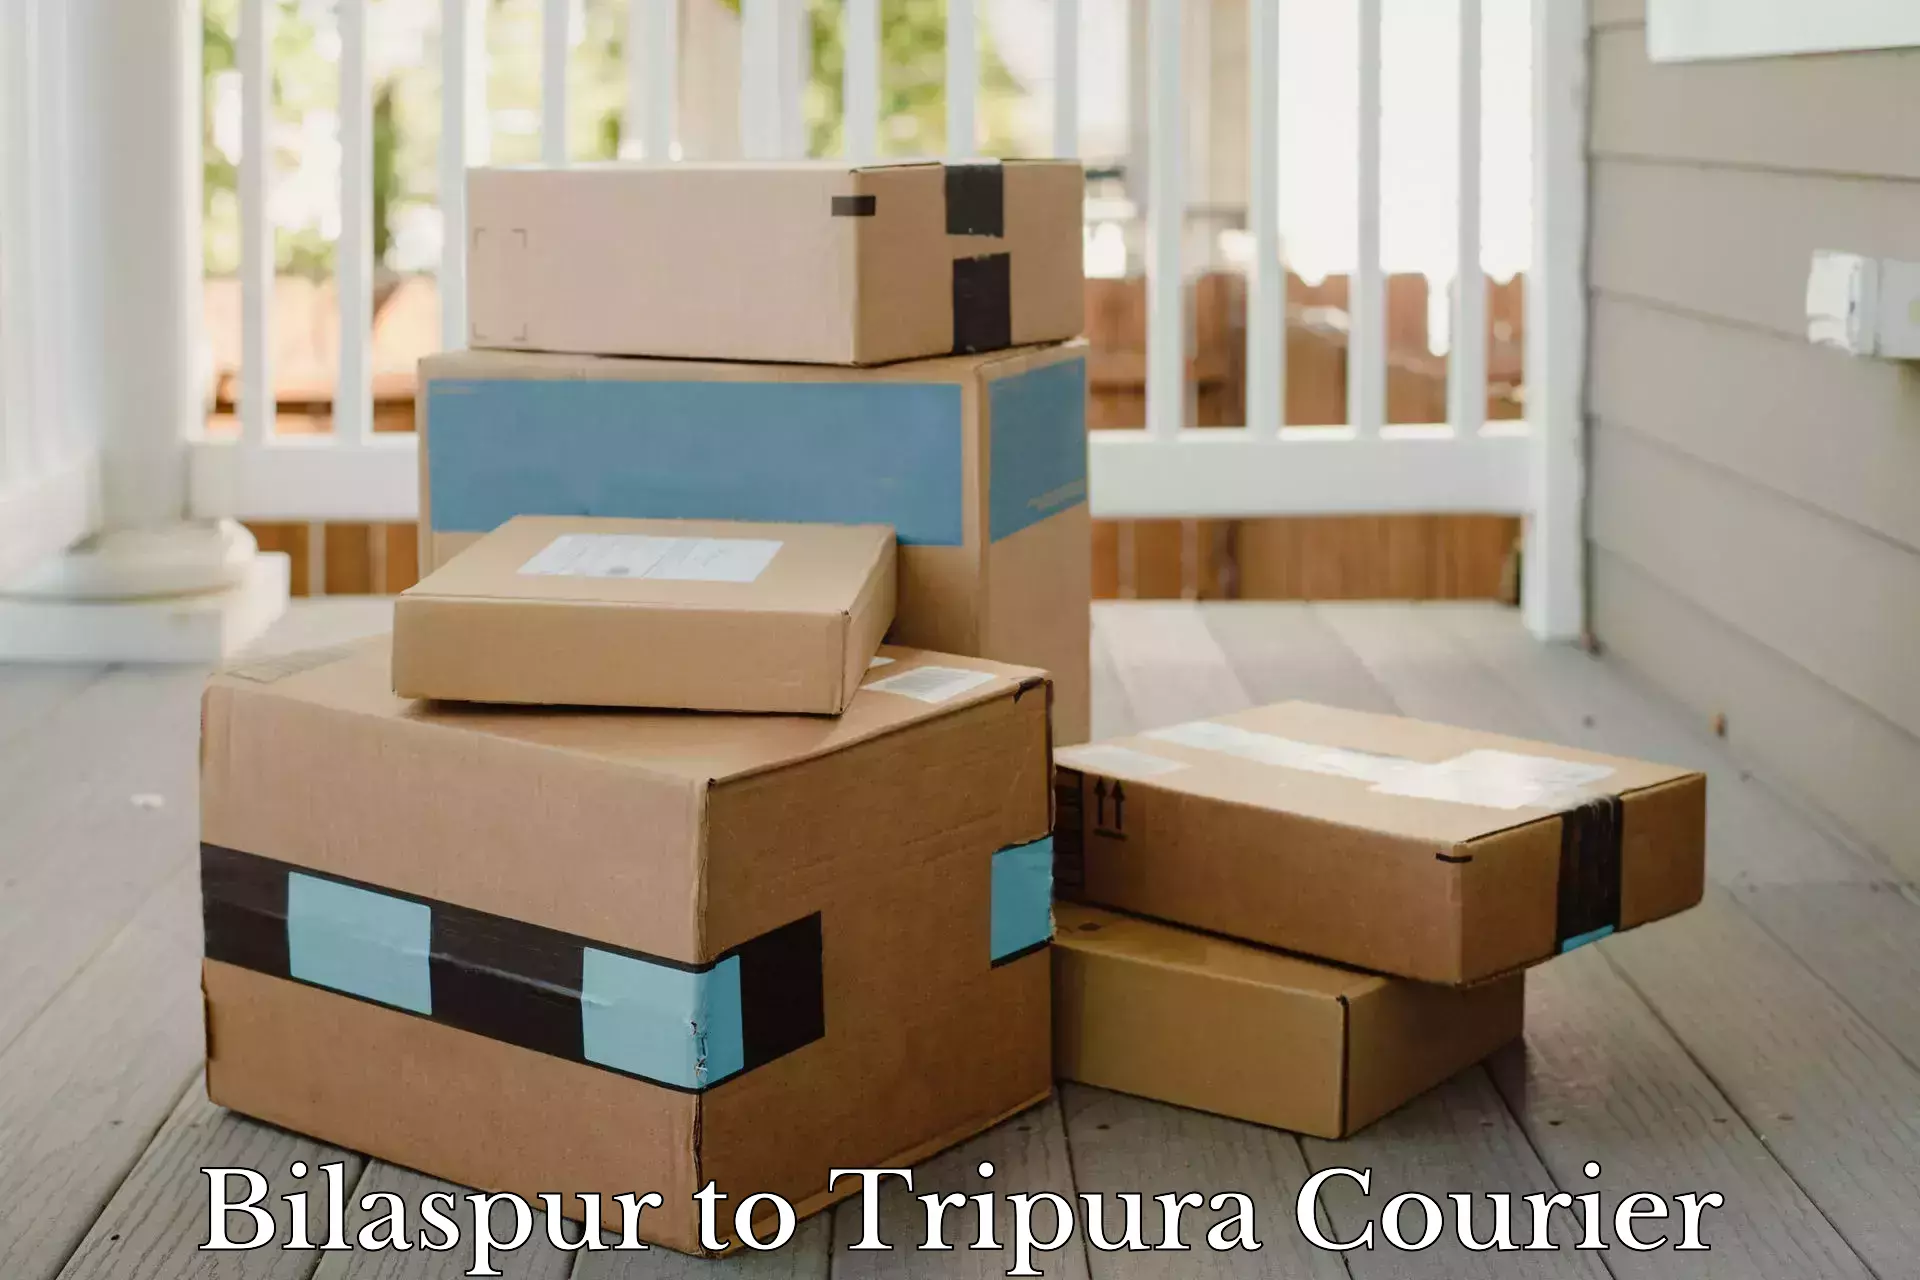 State-of-the-art courier technology Bilaspur to Amarpur